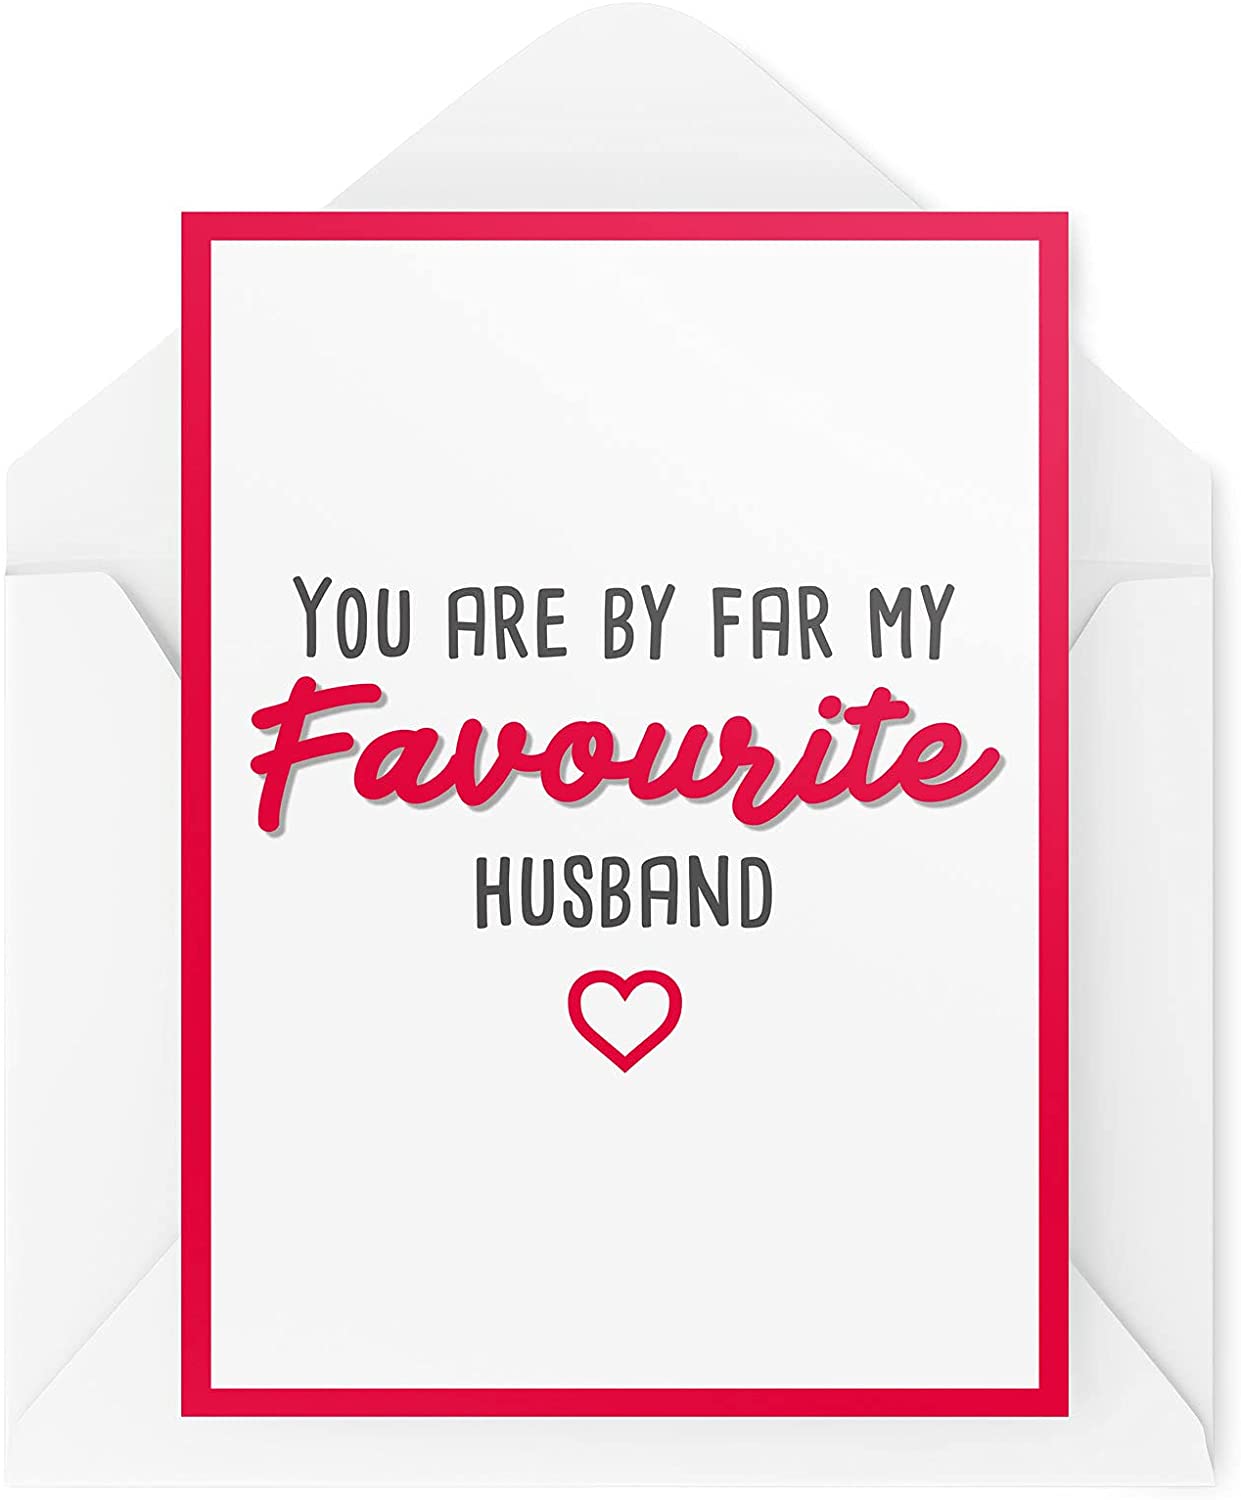 Tongue In Peach You Are By Far My Favourite Husband Joke Card RRP 3.99 CLEARANCE XL 1.99